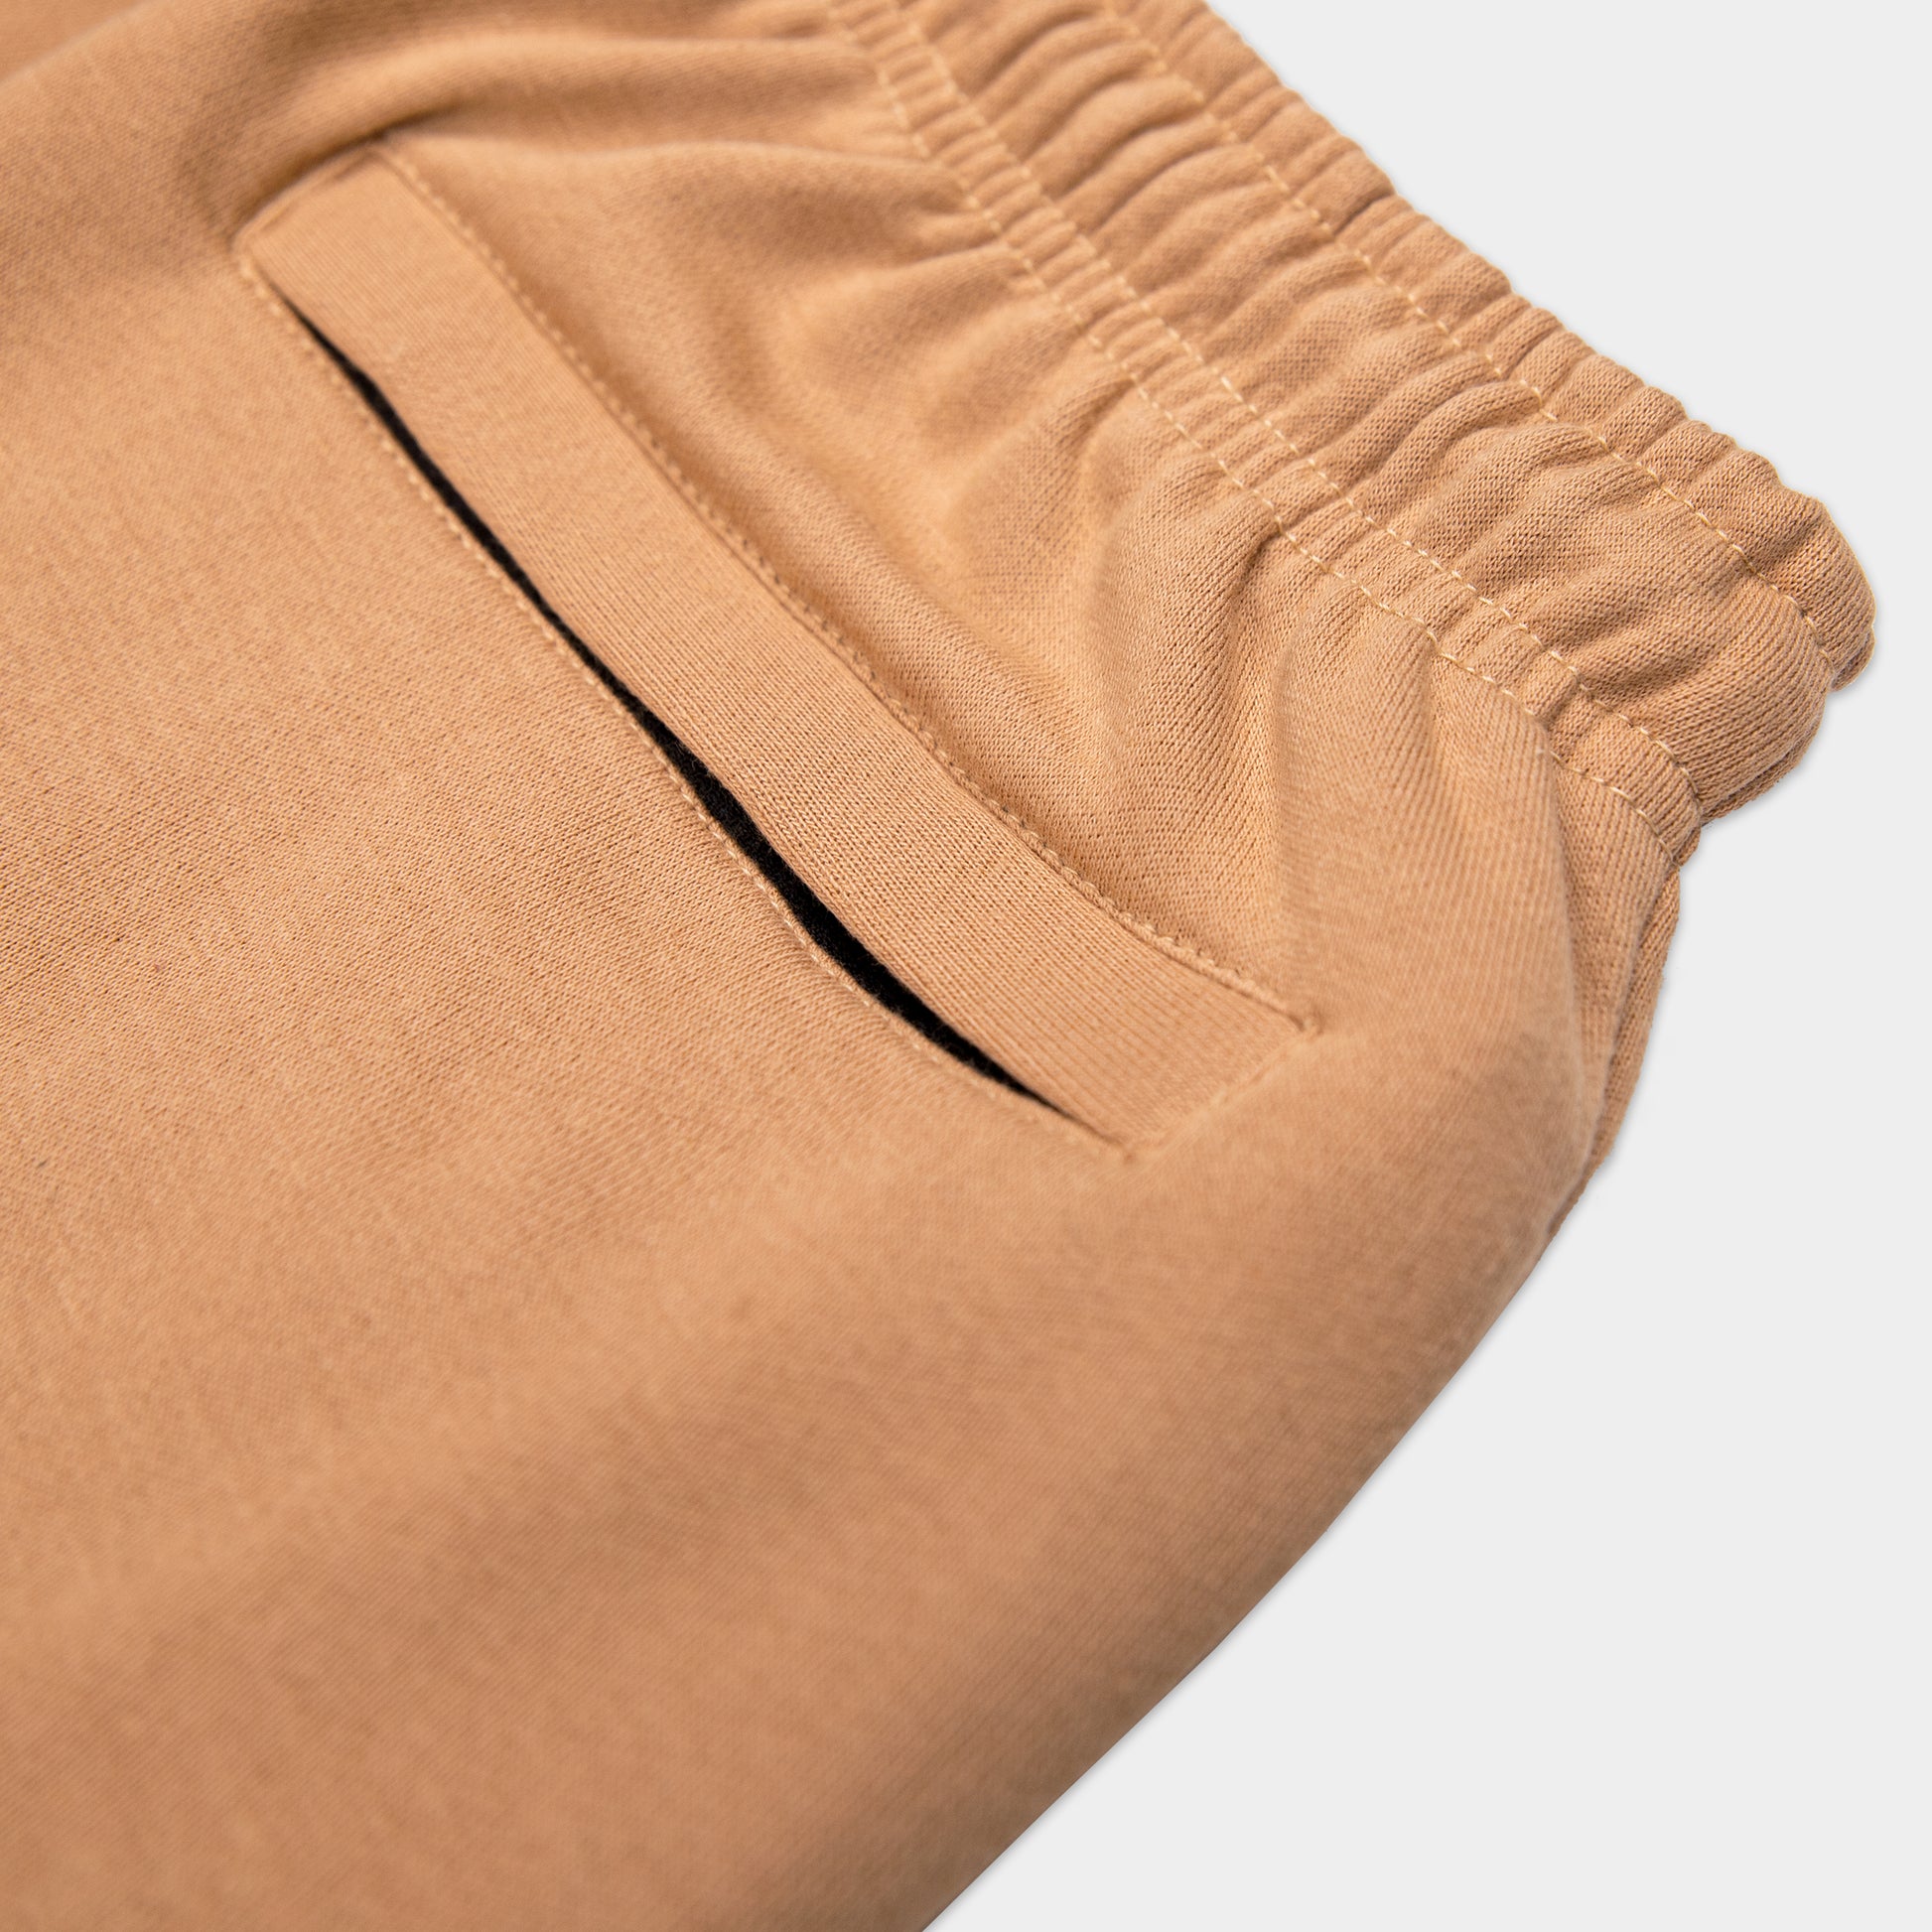 Camel Sweatpants with White Terk Embroidered Logo